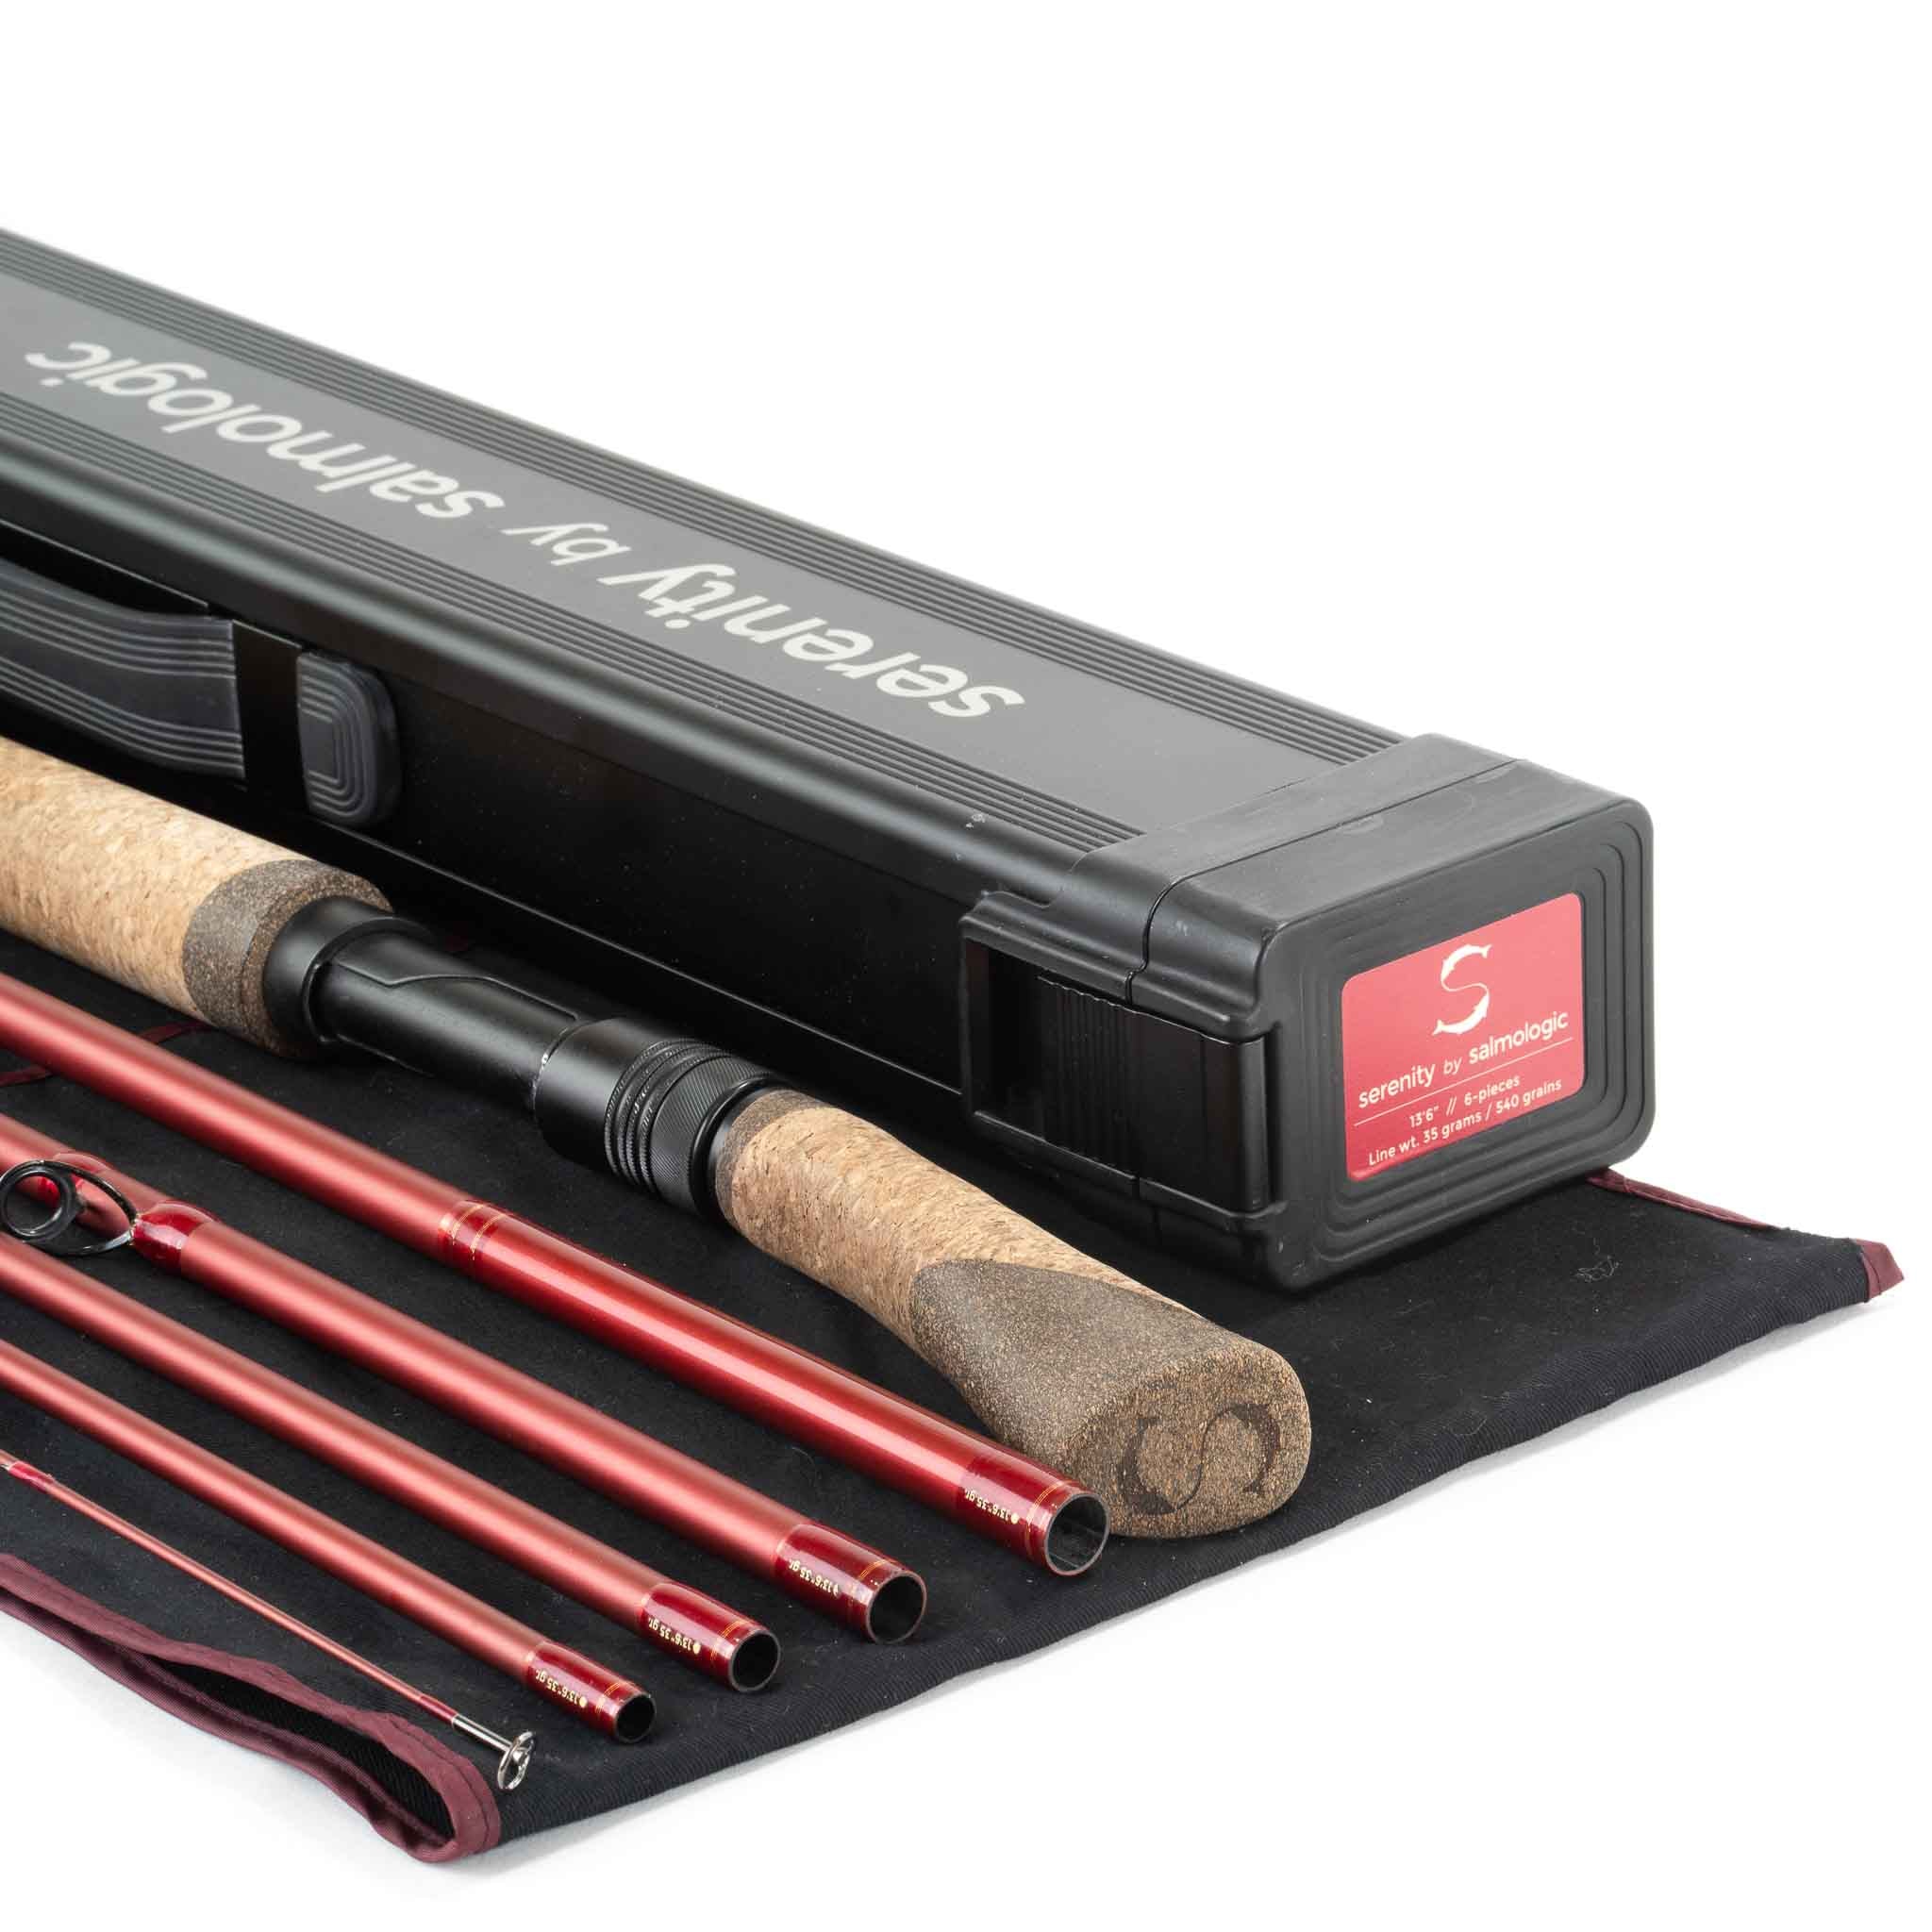 Salmologic Serenity 136-6 Fly Rod - wt 13ft 6in 6pc